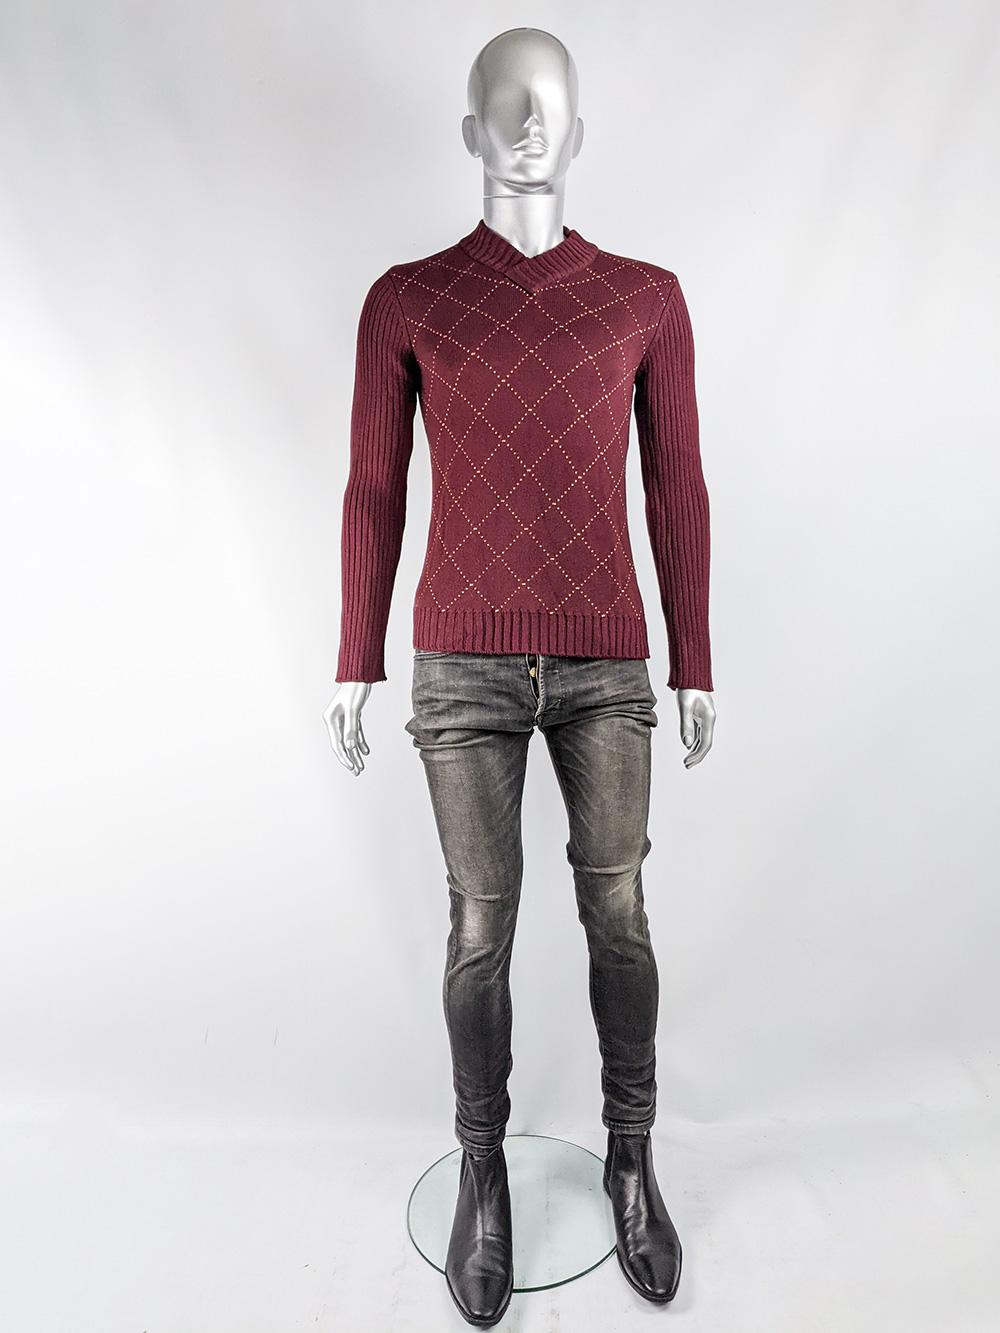 A stylish vintage mens jumper from the 90s by Dolce & Gabbana for their mainline. In a wine red virgin wool with a diamond pattern intarsia knit through the front and ribbed sleeves and back. 

Size: Not indicated; fits like a men's Small. Please